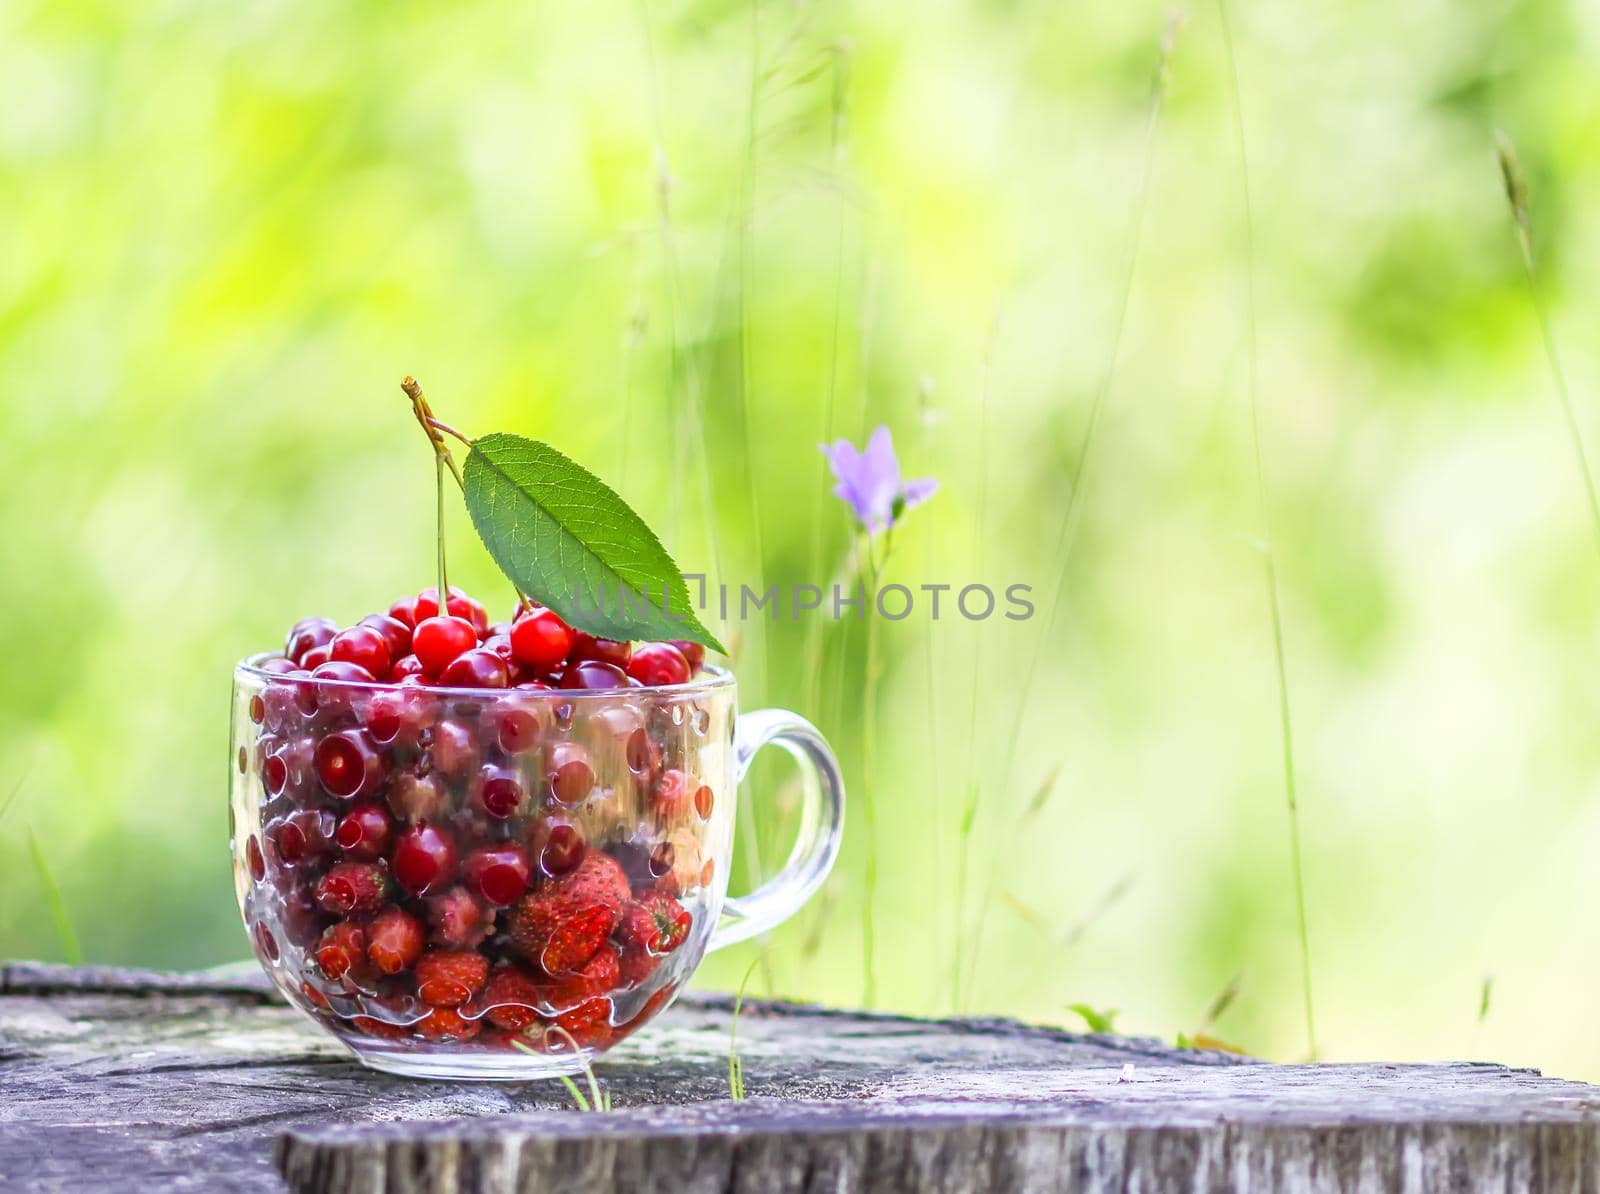 Ripe wet cherries and strawberries in a transparent cup on tree stump. Fresh red fruits in summer garden in the countryside